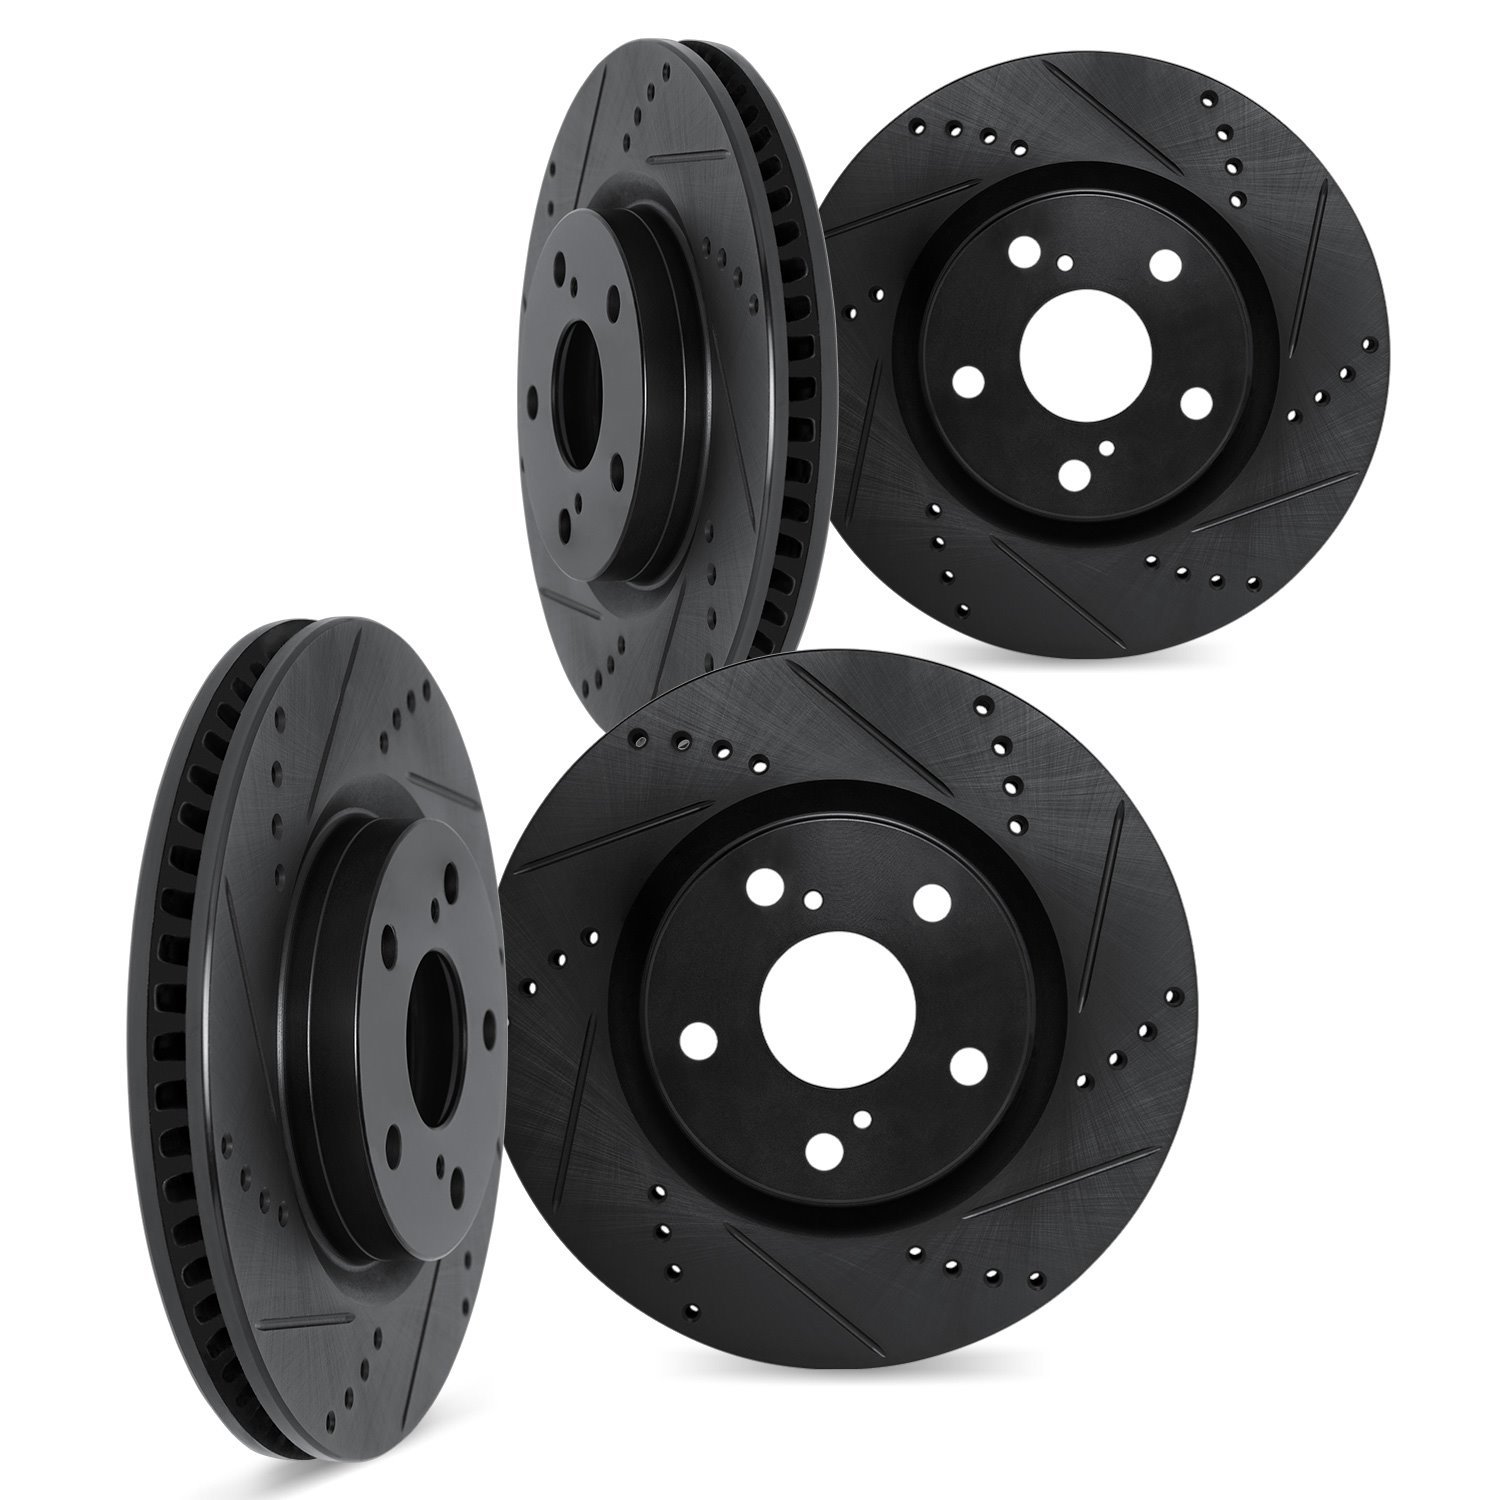 8004-67002 Drilled/Slotted Brake Rotors [Black], 2003-2019 Infiniti/Nissan, Position: Front and Rear